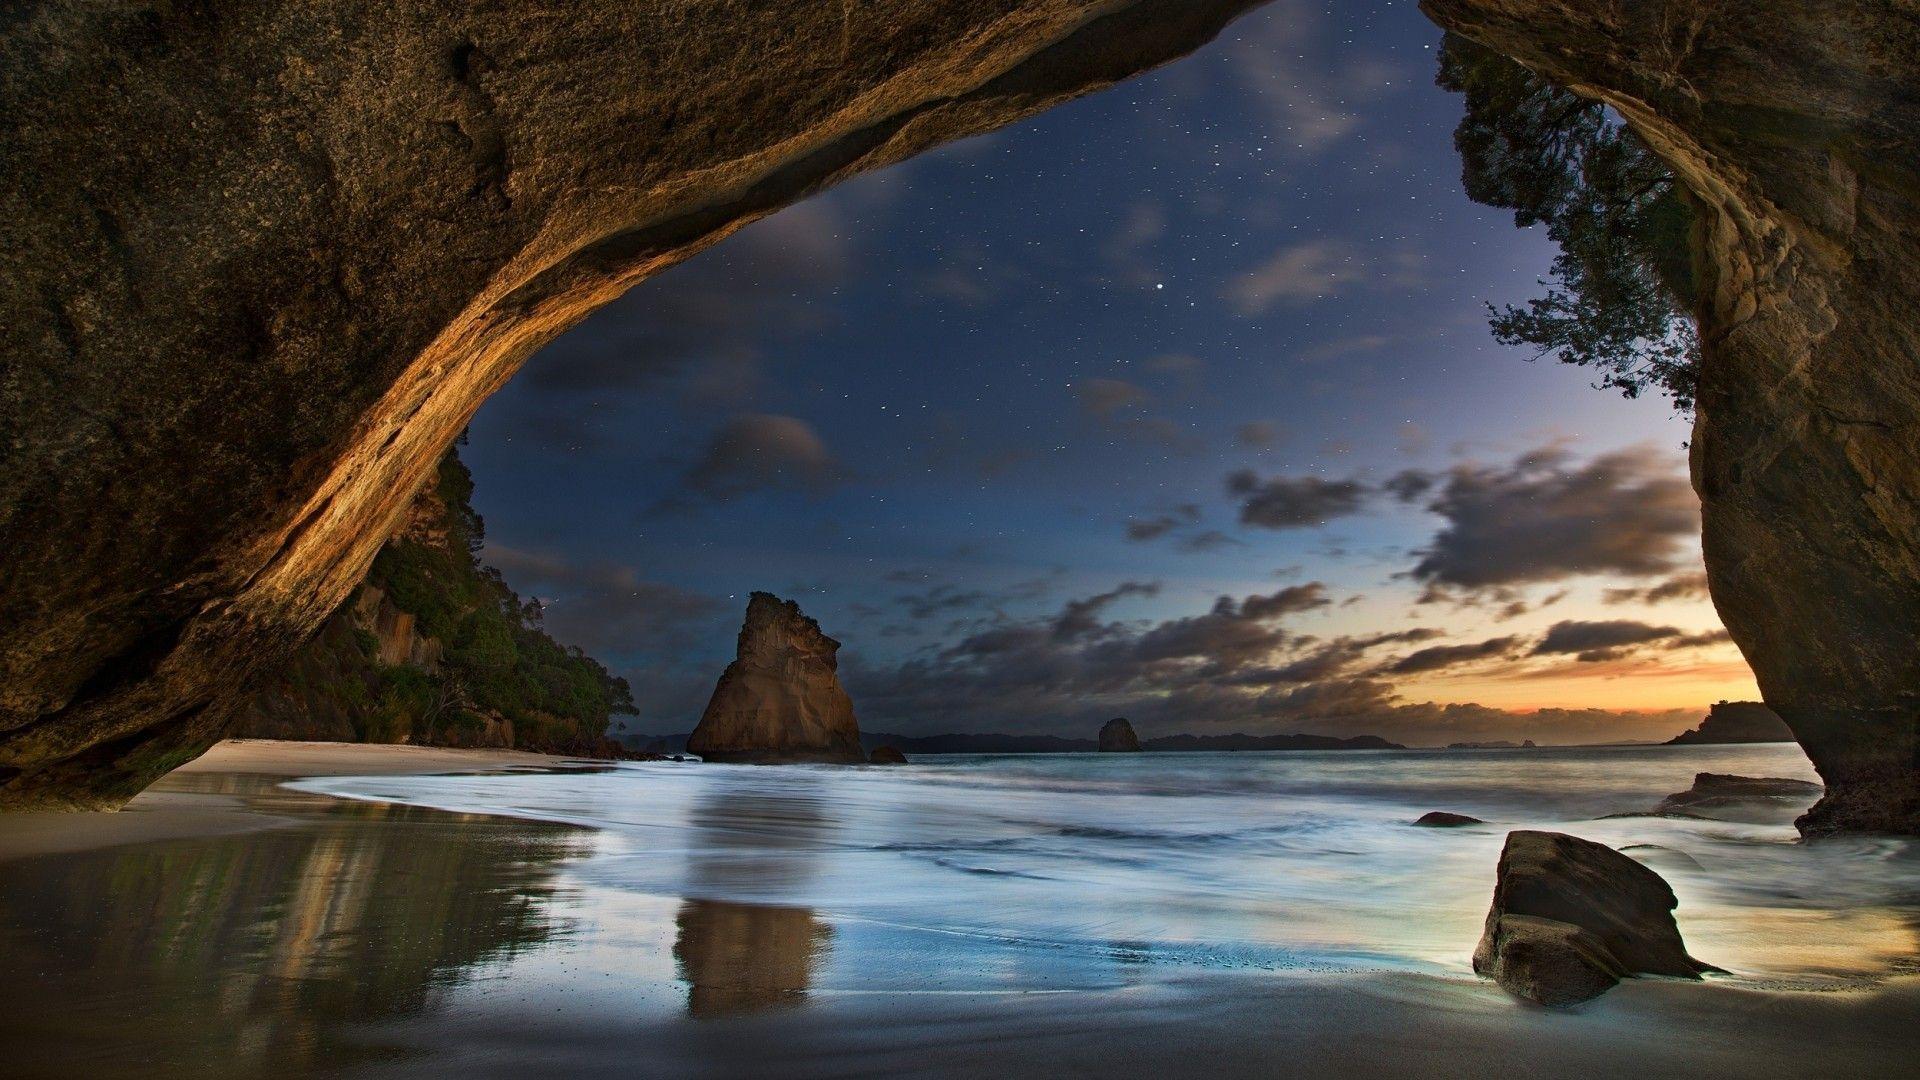 Beach At Night Wallpapers - Wallpaper Cave